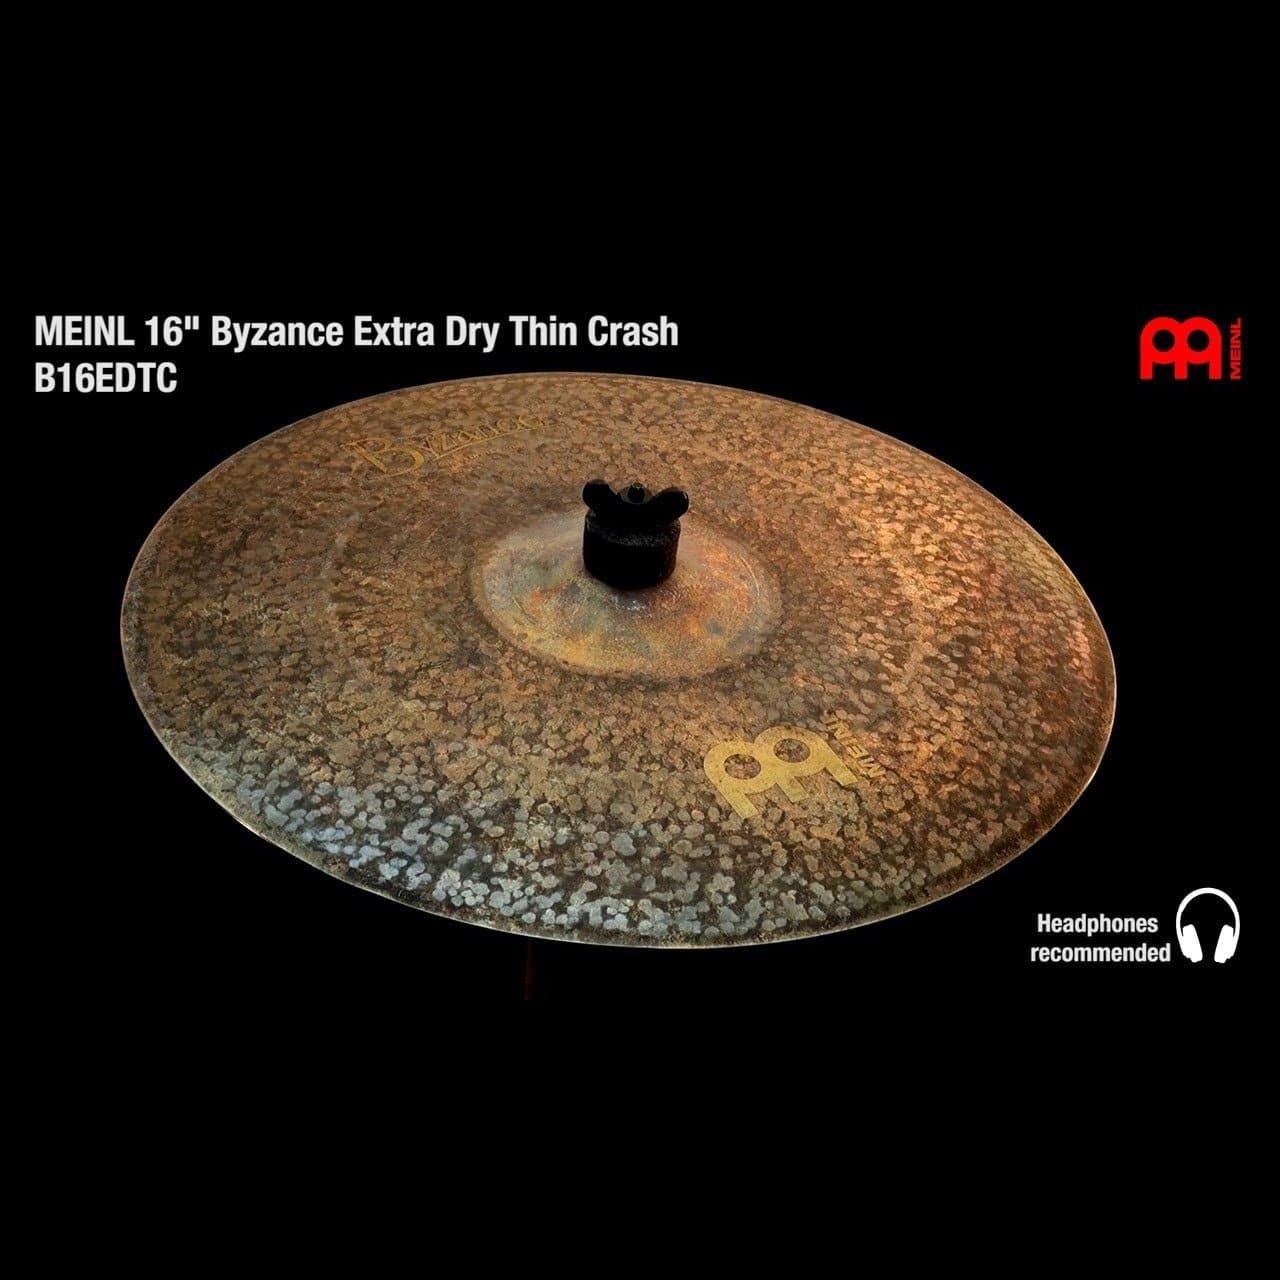 Meinl Byzance Extra Dry Thin Crash Cymbal 16 | Drum Center Of